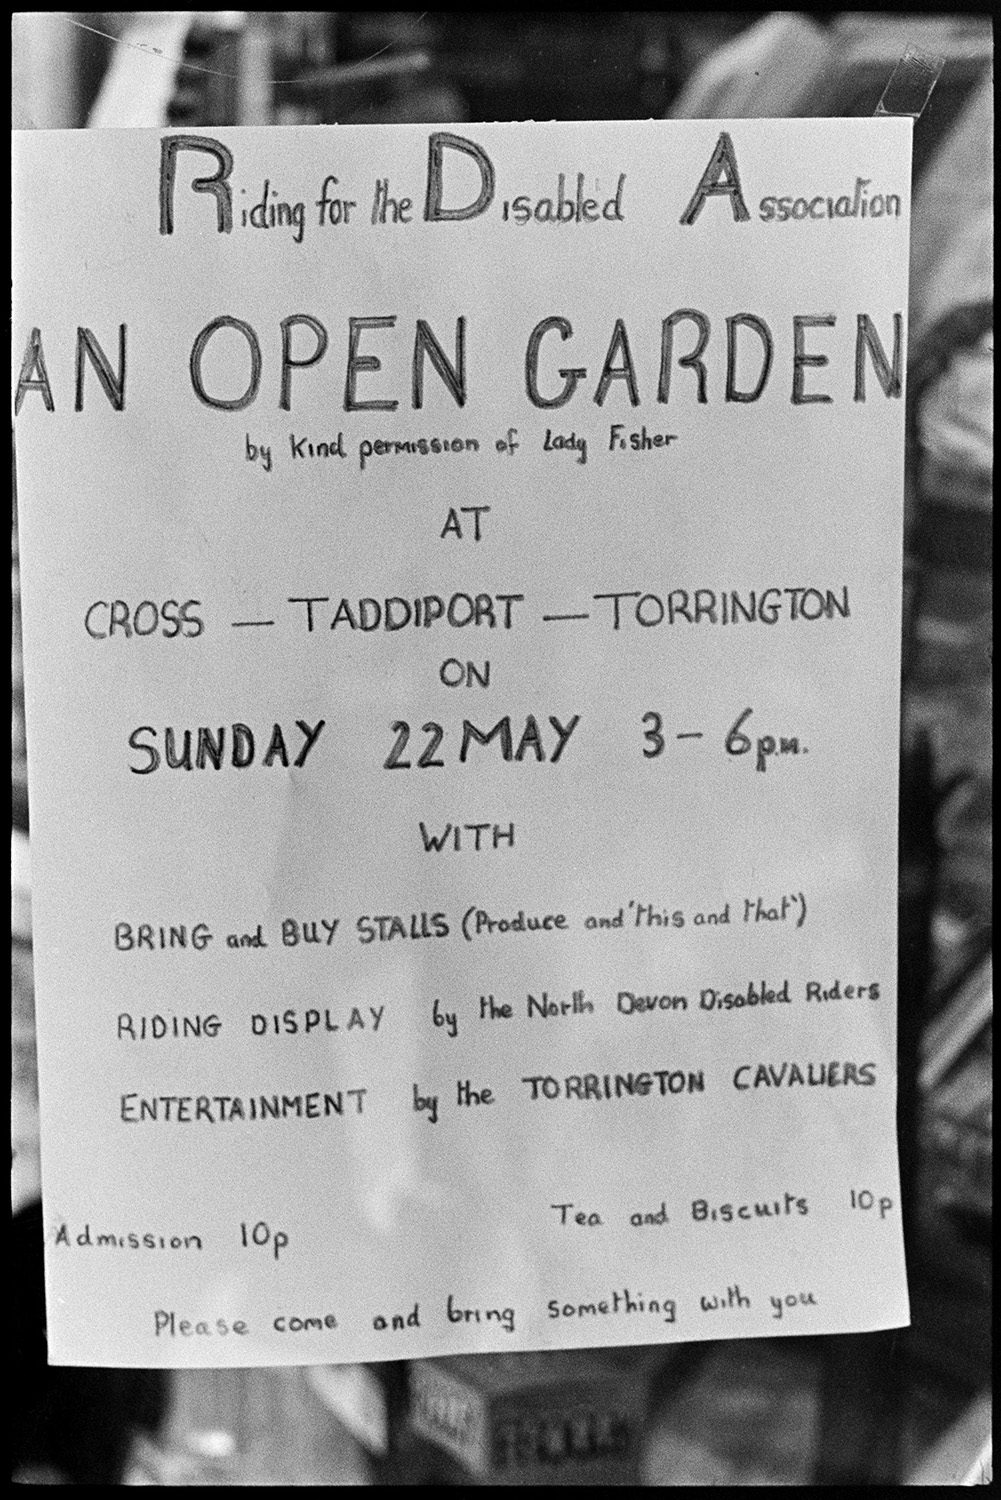 Poster for gymkhana at Cross, see sheets 777, 778. 
[A poster advertising an open garden or fete at Cross House, Torrington on 22 May 1977 to raise money for the Riding for the Disabled Association.]